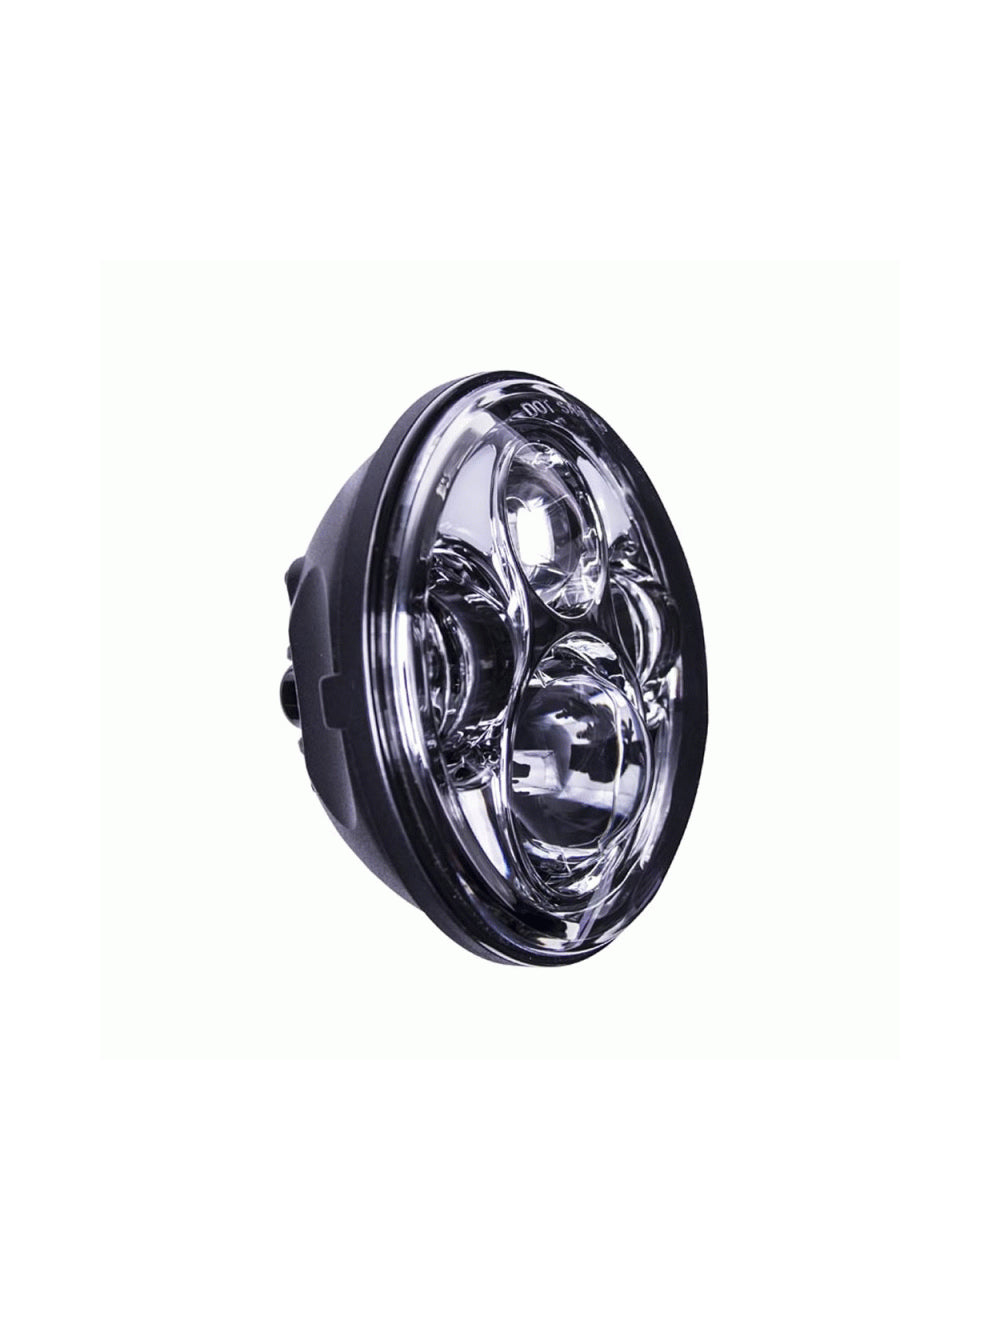 Heise HE-SHL561 5.6 Inch Round W/ Partial Halo Silver Front 8-Led Headlight